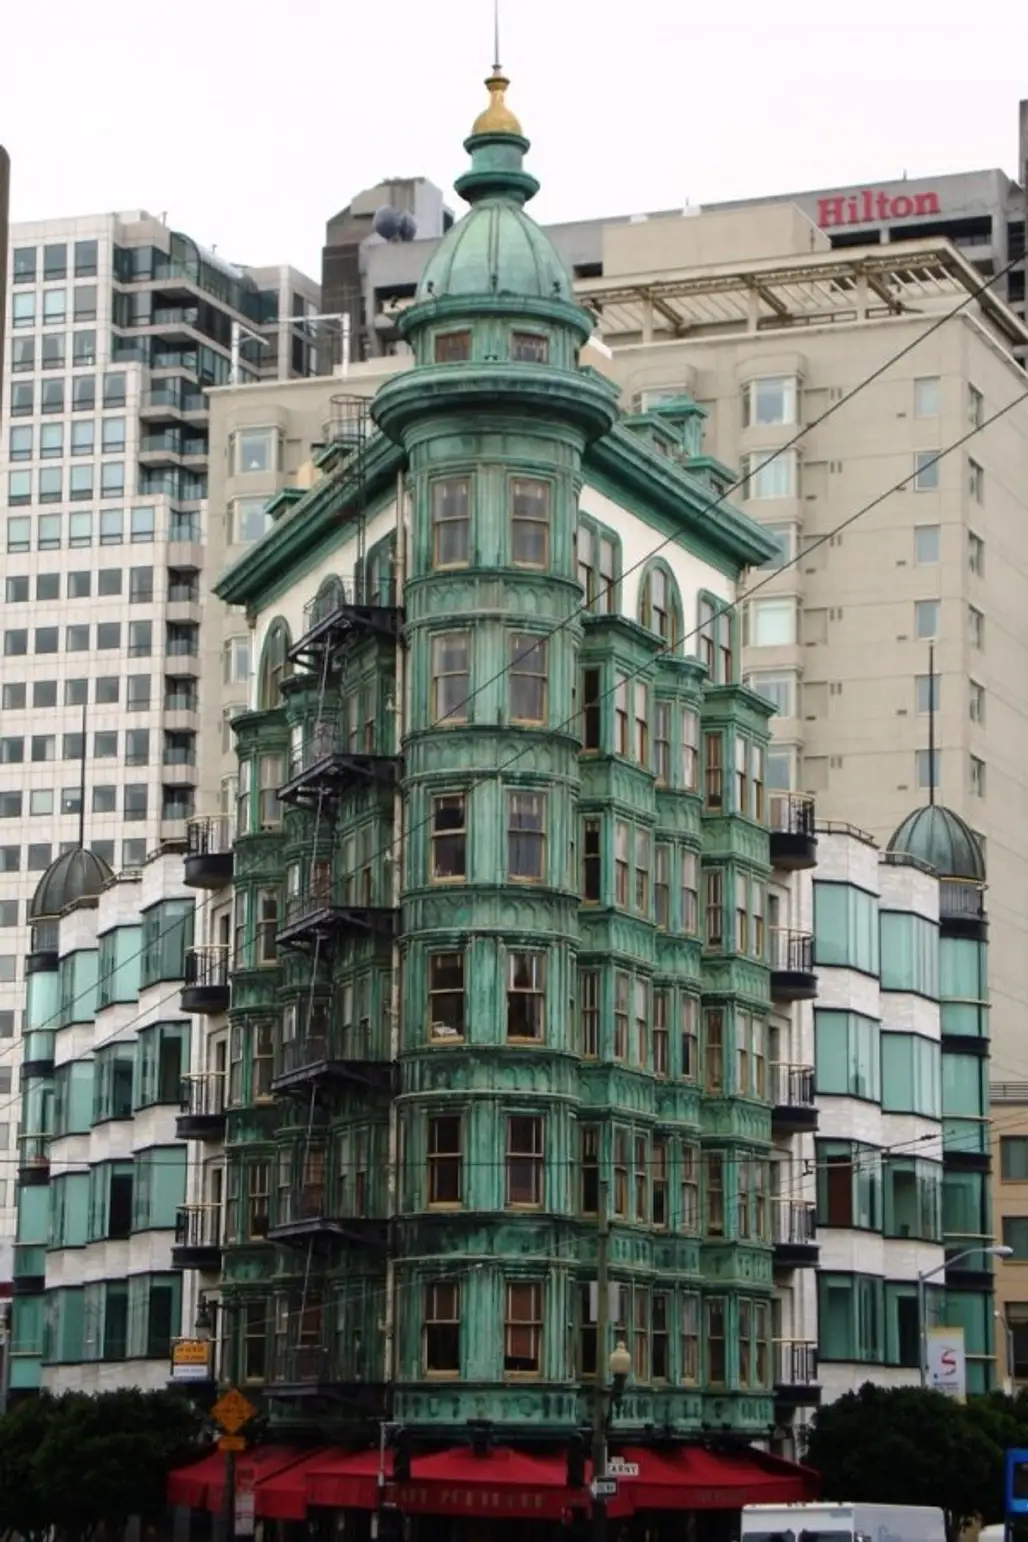 The Green Columbus Building